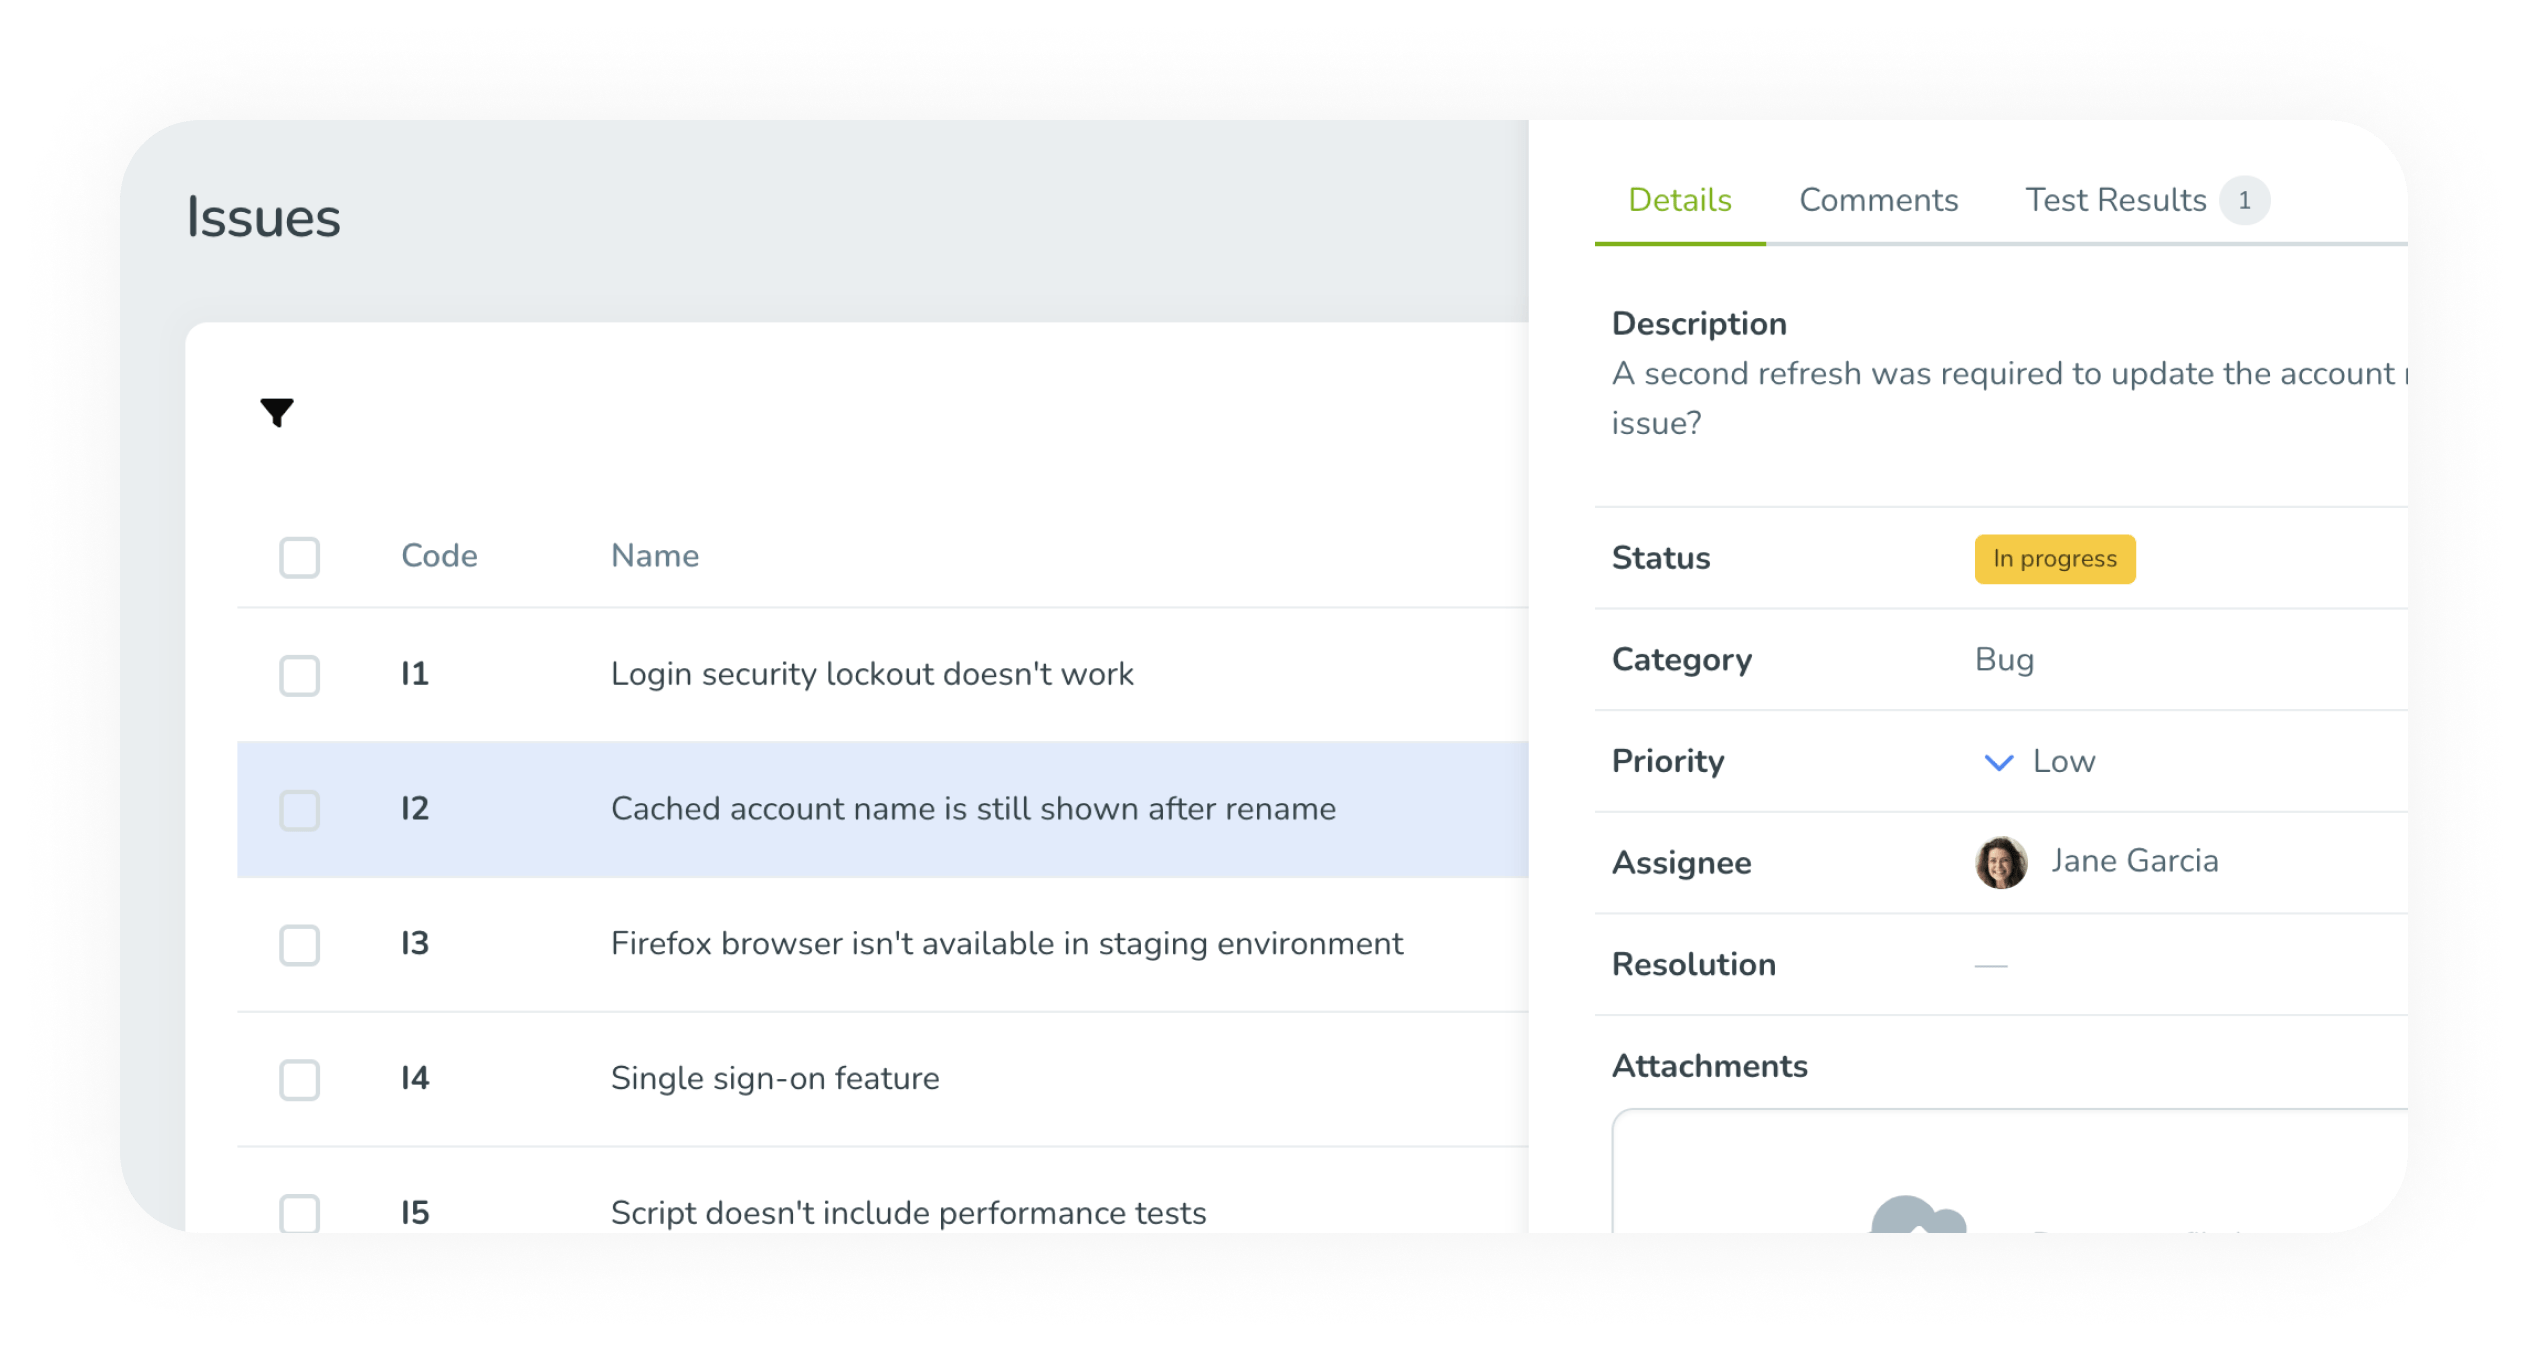 Leverage TestMonitor’s comprehensive issue tracker to document, prioritize, organize, and track issues and assign them to your project members for action